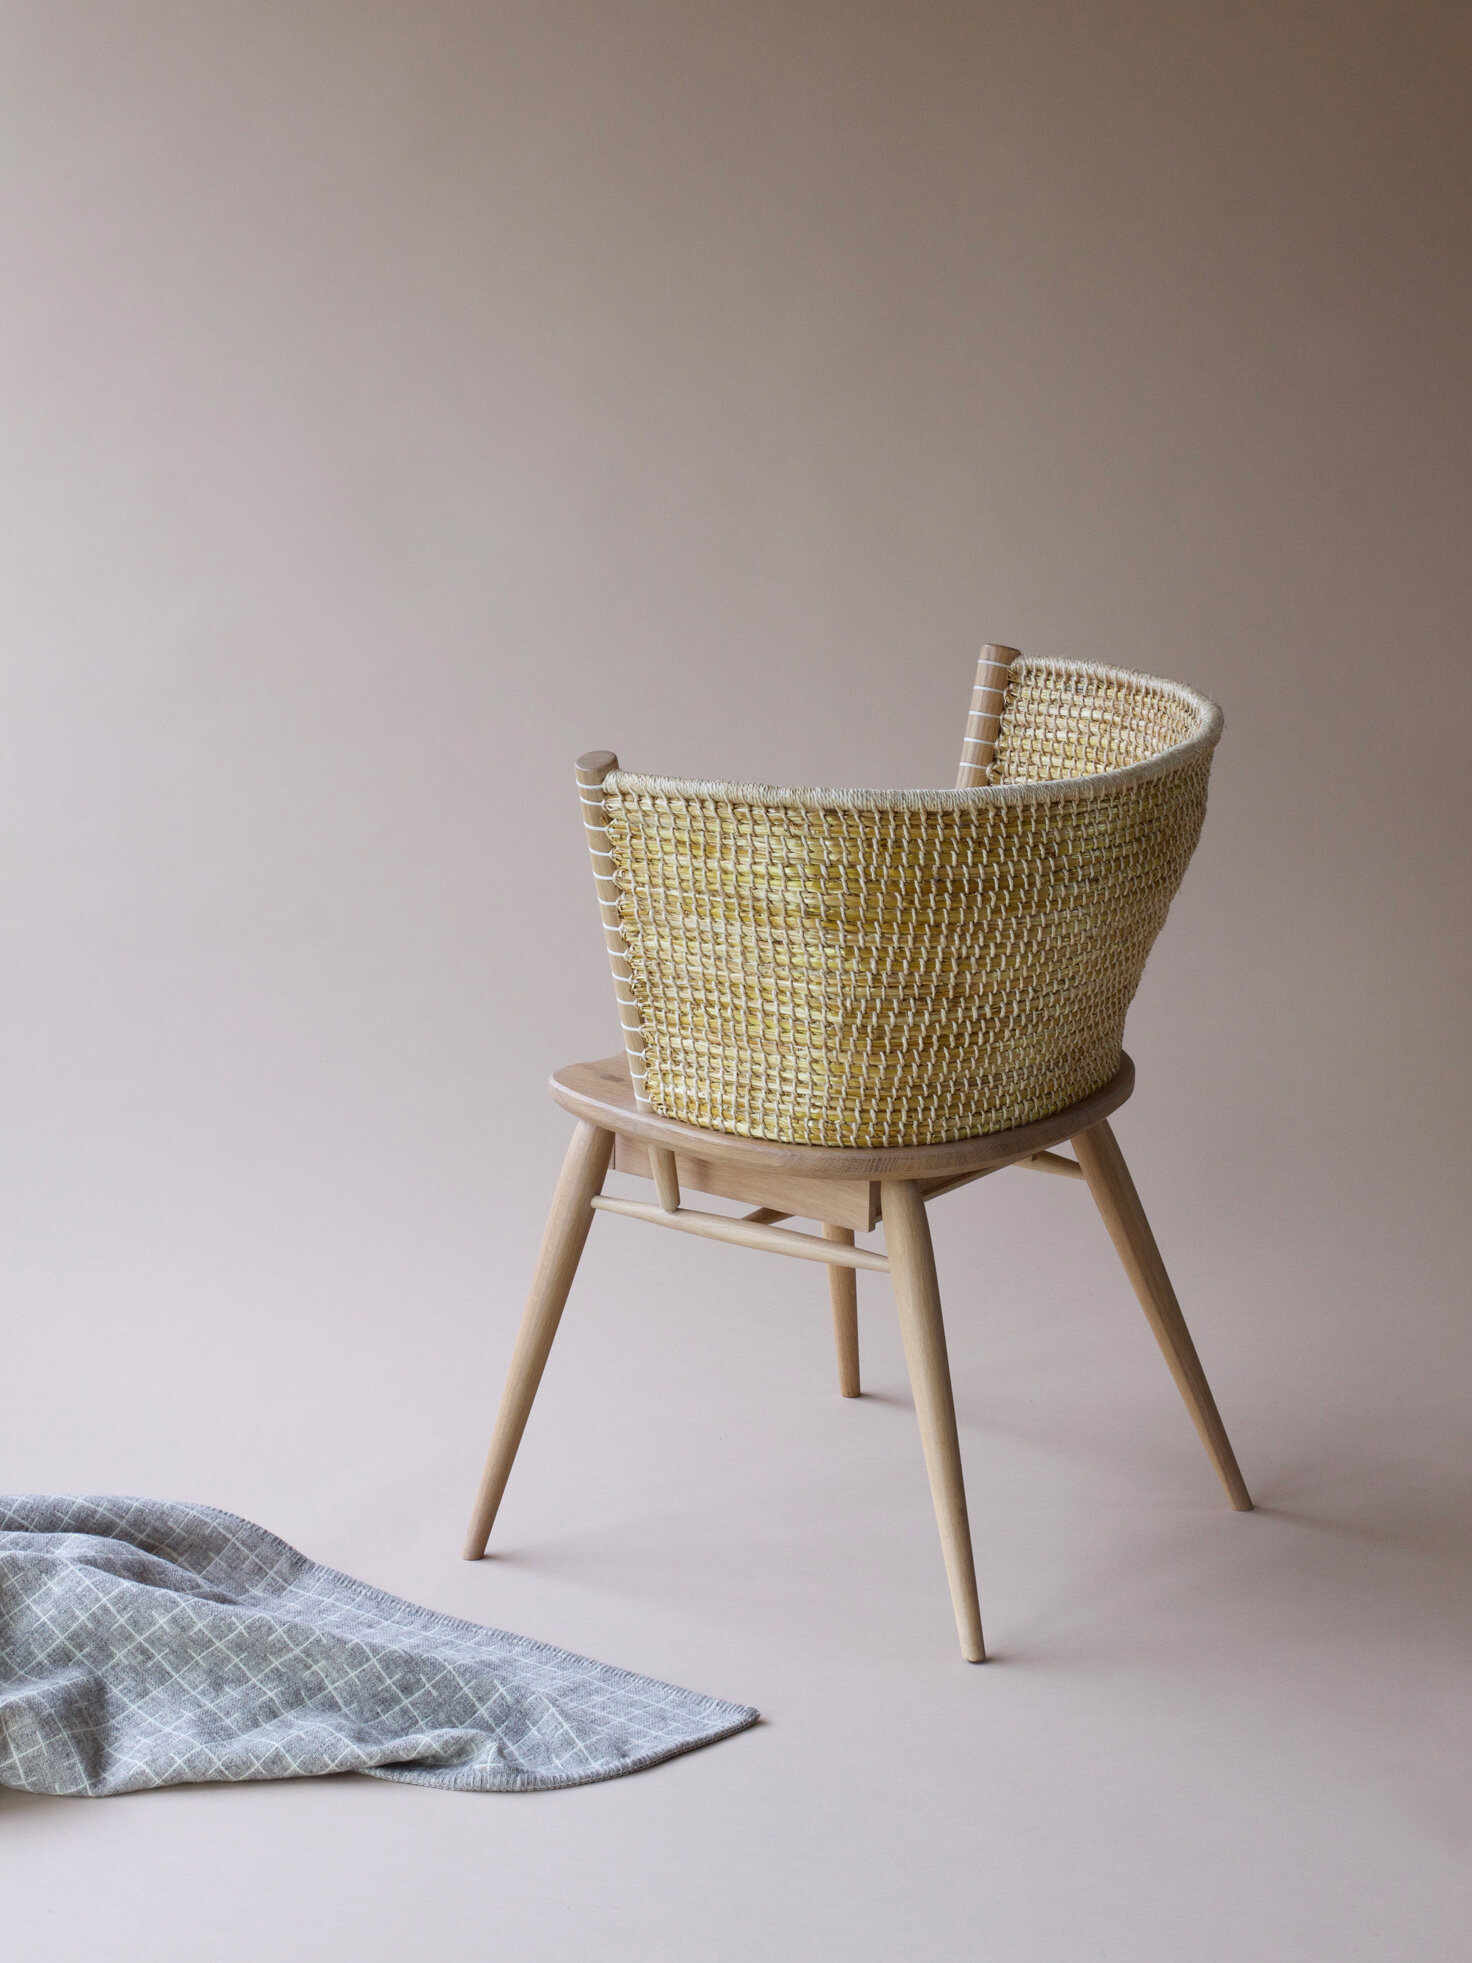 Eleanor_Pritchard_Sourdough_blanket_with Brodgar_chair_by_Gareth_+_Neal_+_Kevin_Gauld.jpg